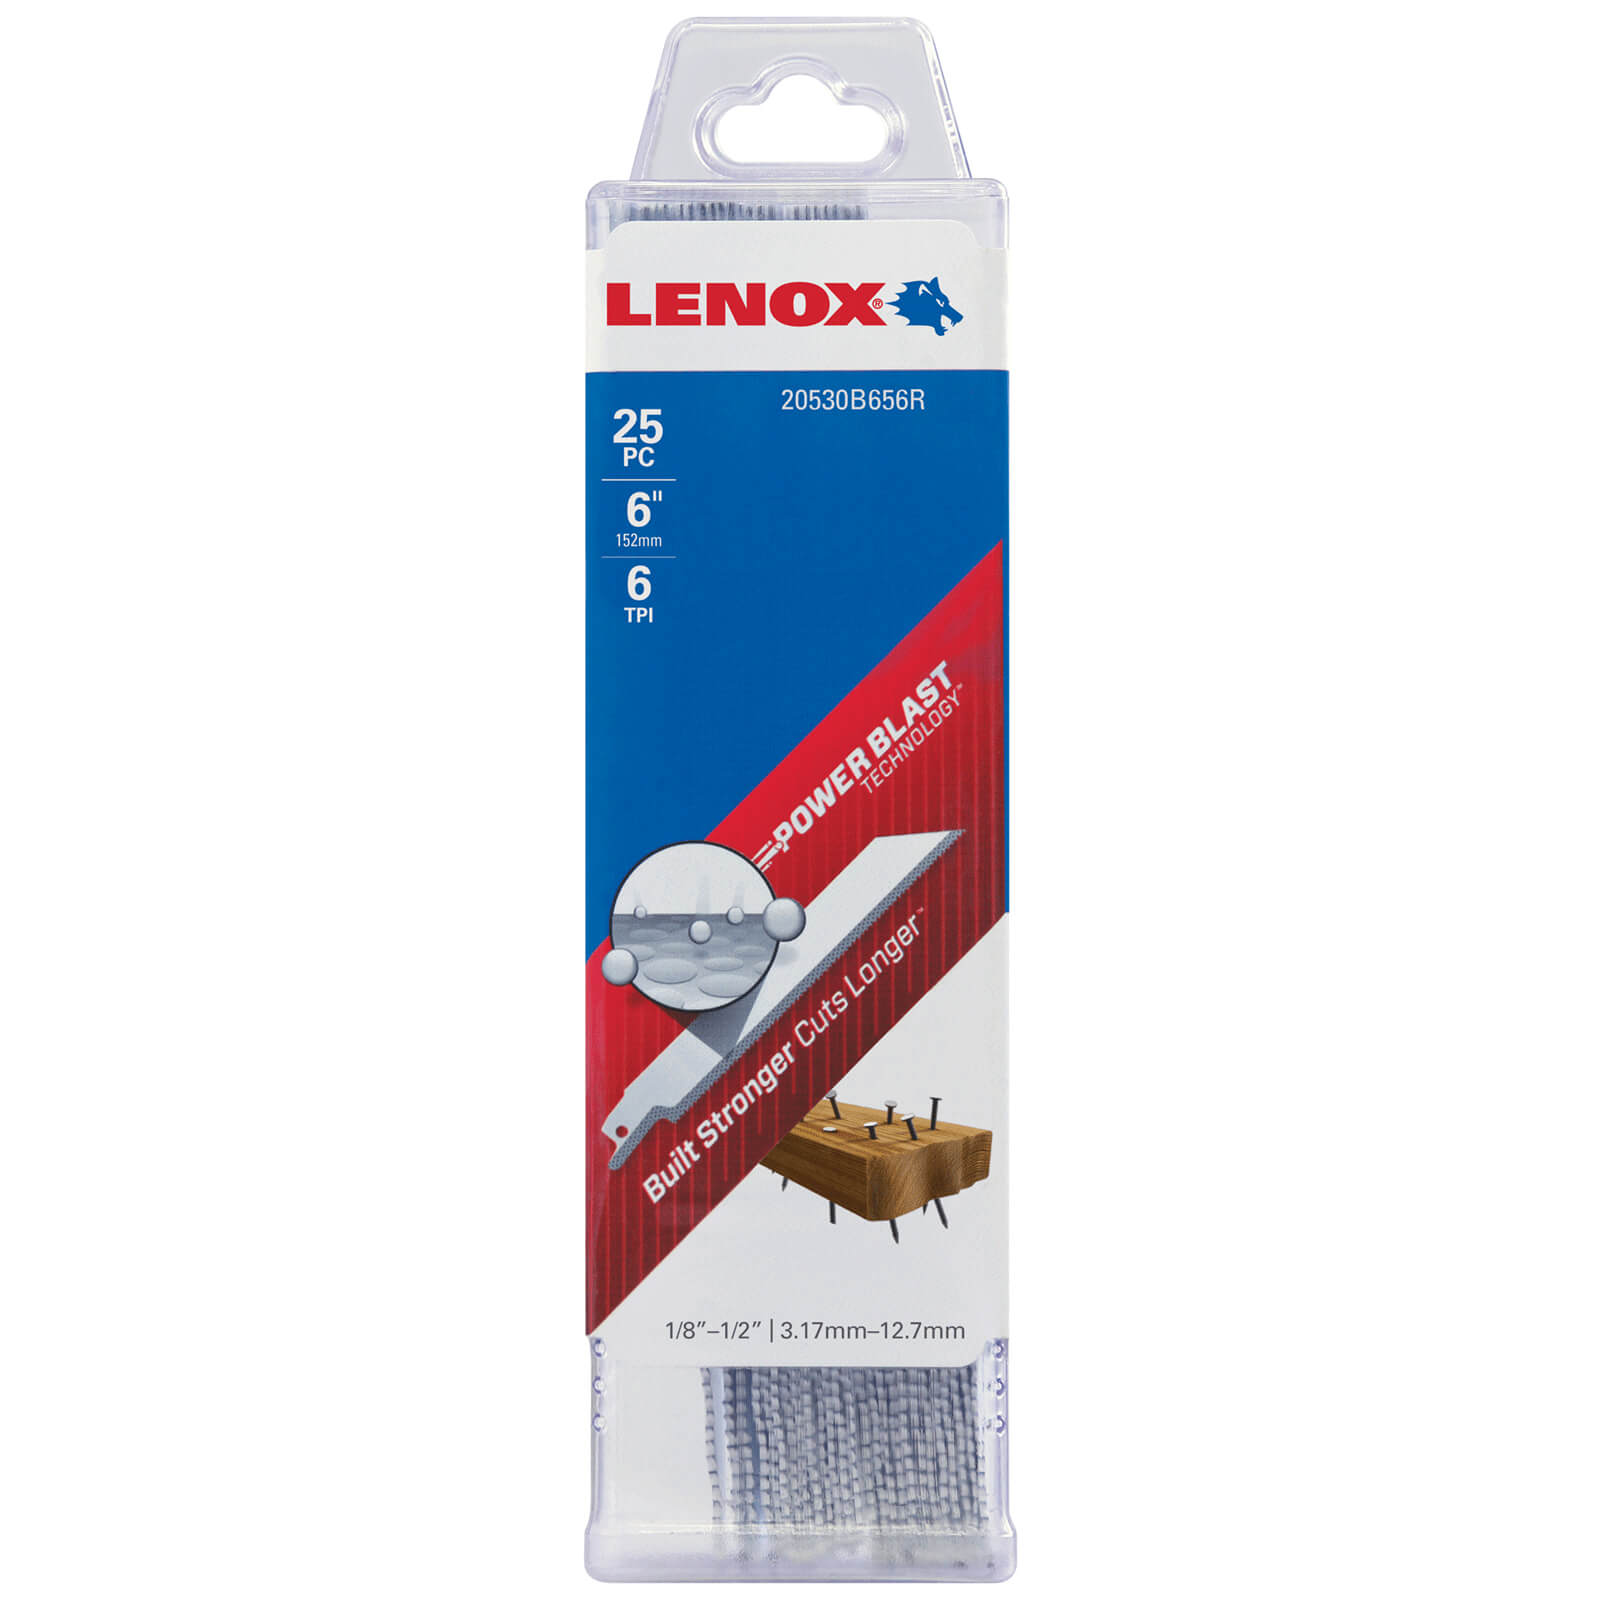 Photo of Lenox 6tpi Nail Embedded Wood Cutting Reciprocating Saw Blades 229mm Pack Of 25